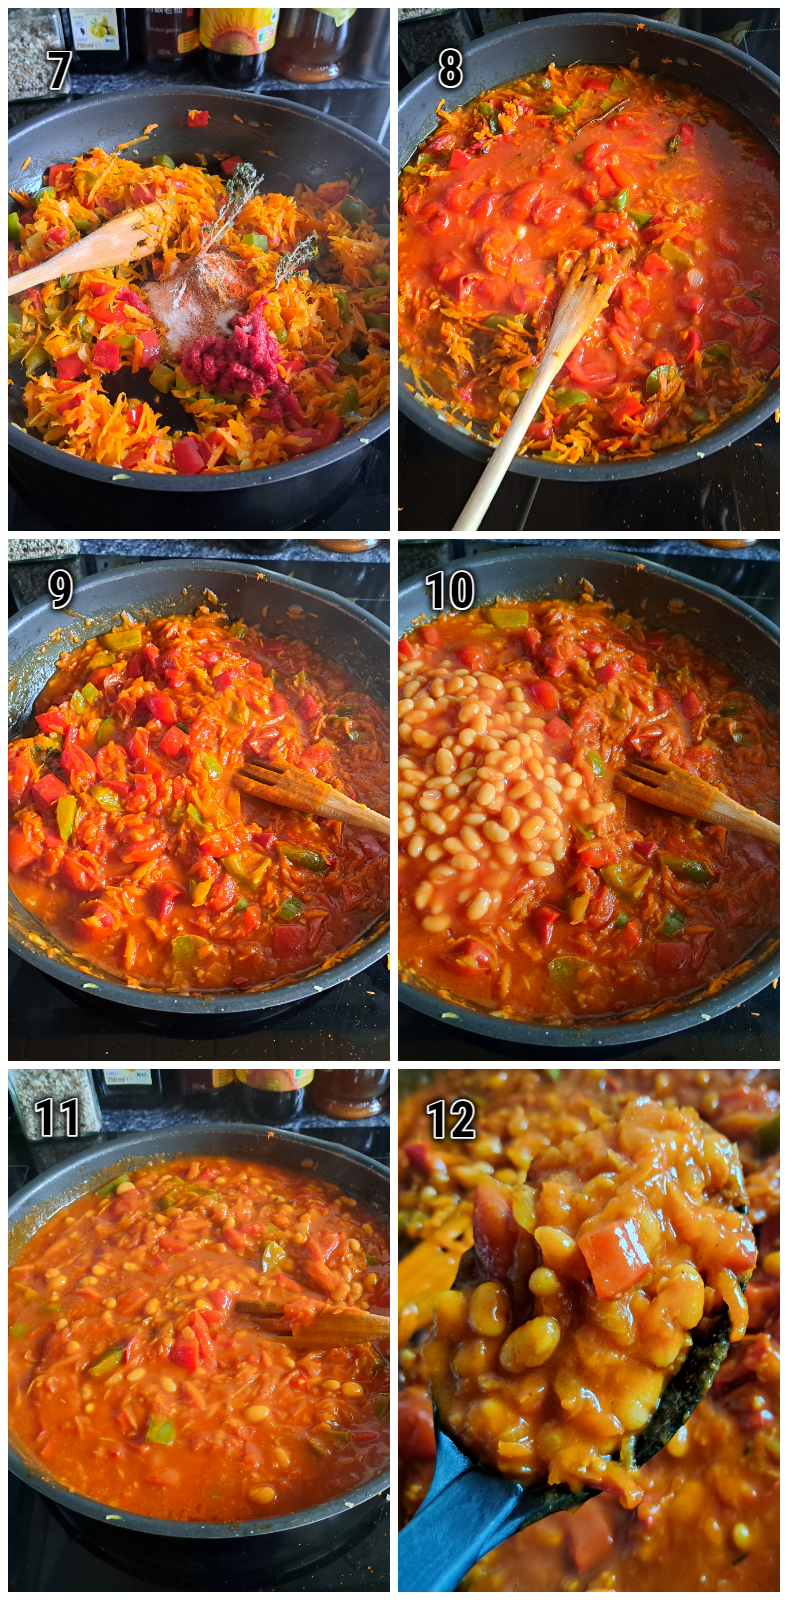  A step-by-step collage on how to make chakalaka.